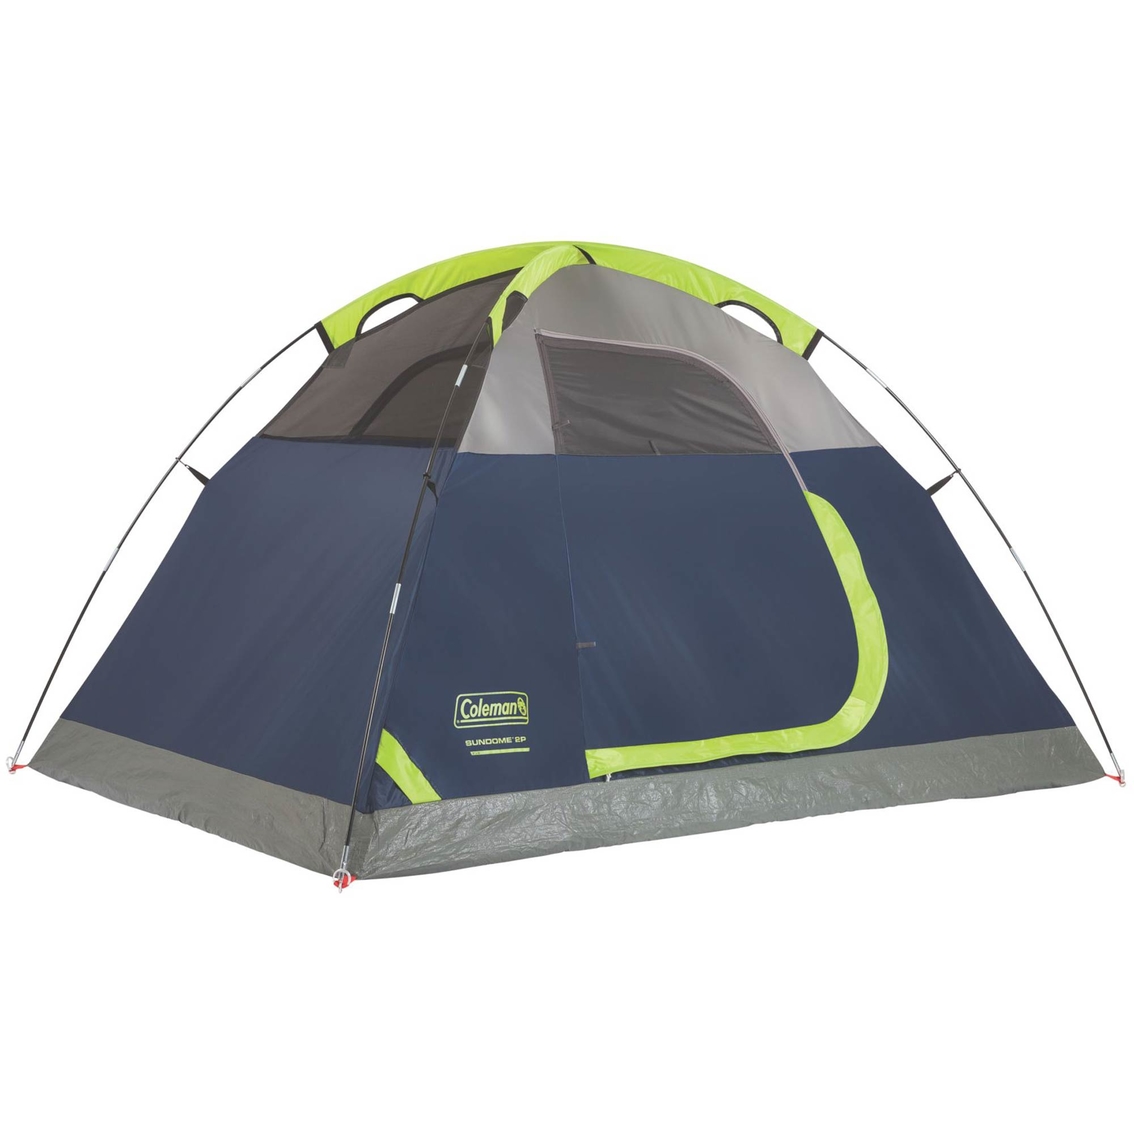 Coleman 7x5 2 Person Tent - Image 3 of 5